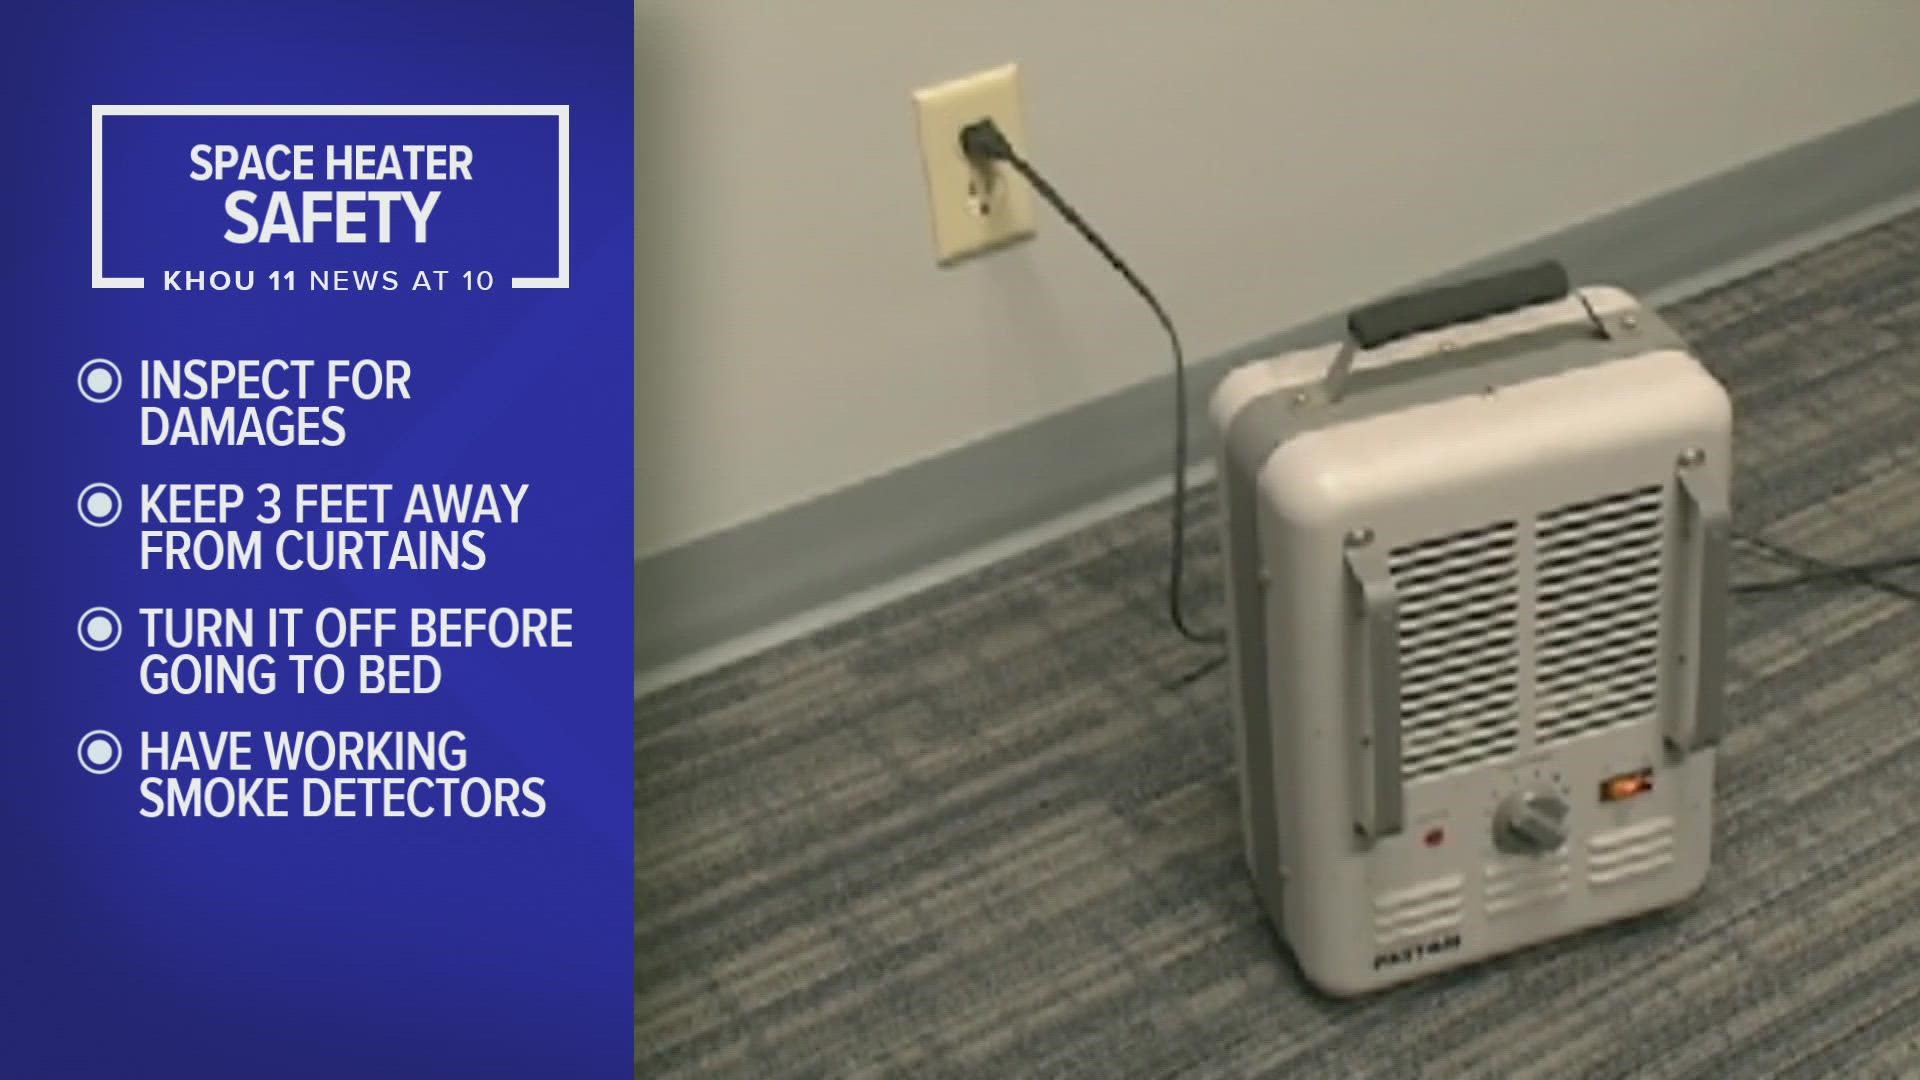 As the temps drop across Houston, firefighters want everyone to be alert about the dangers of space heaters if not used properly.